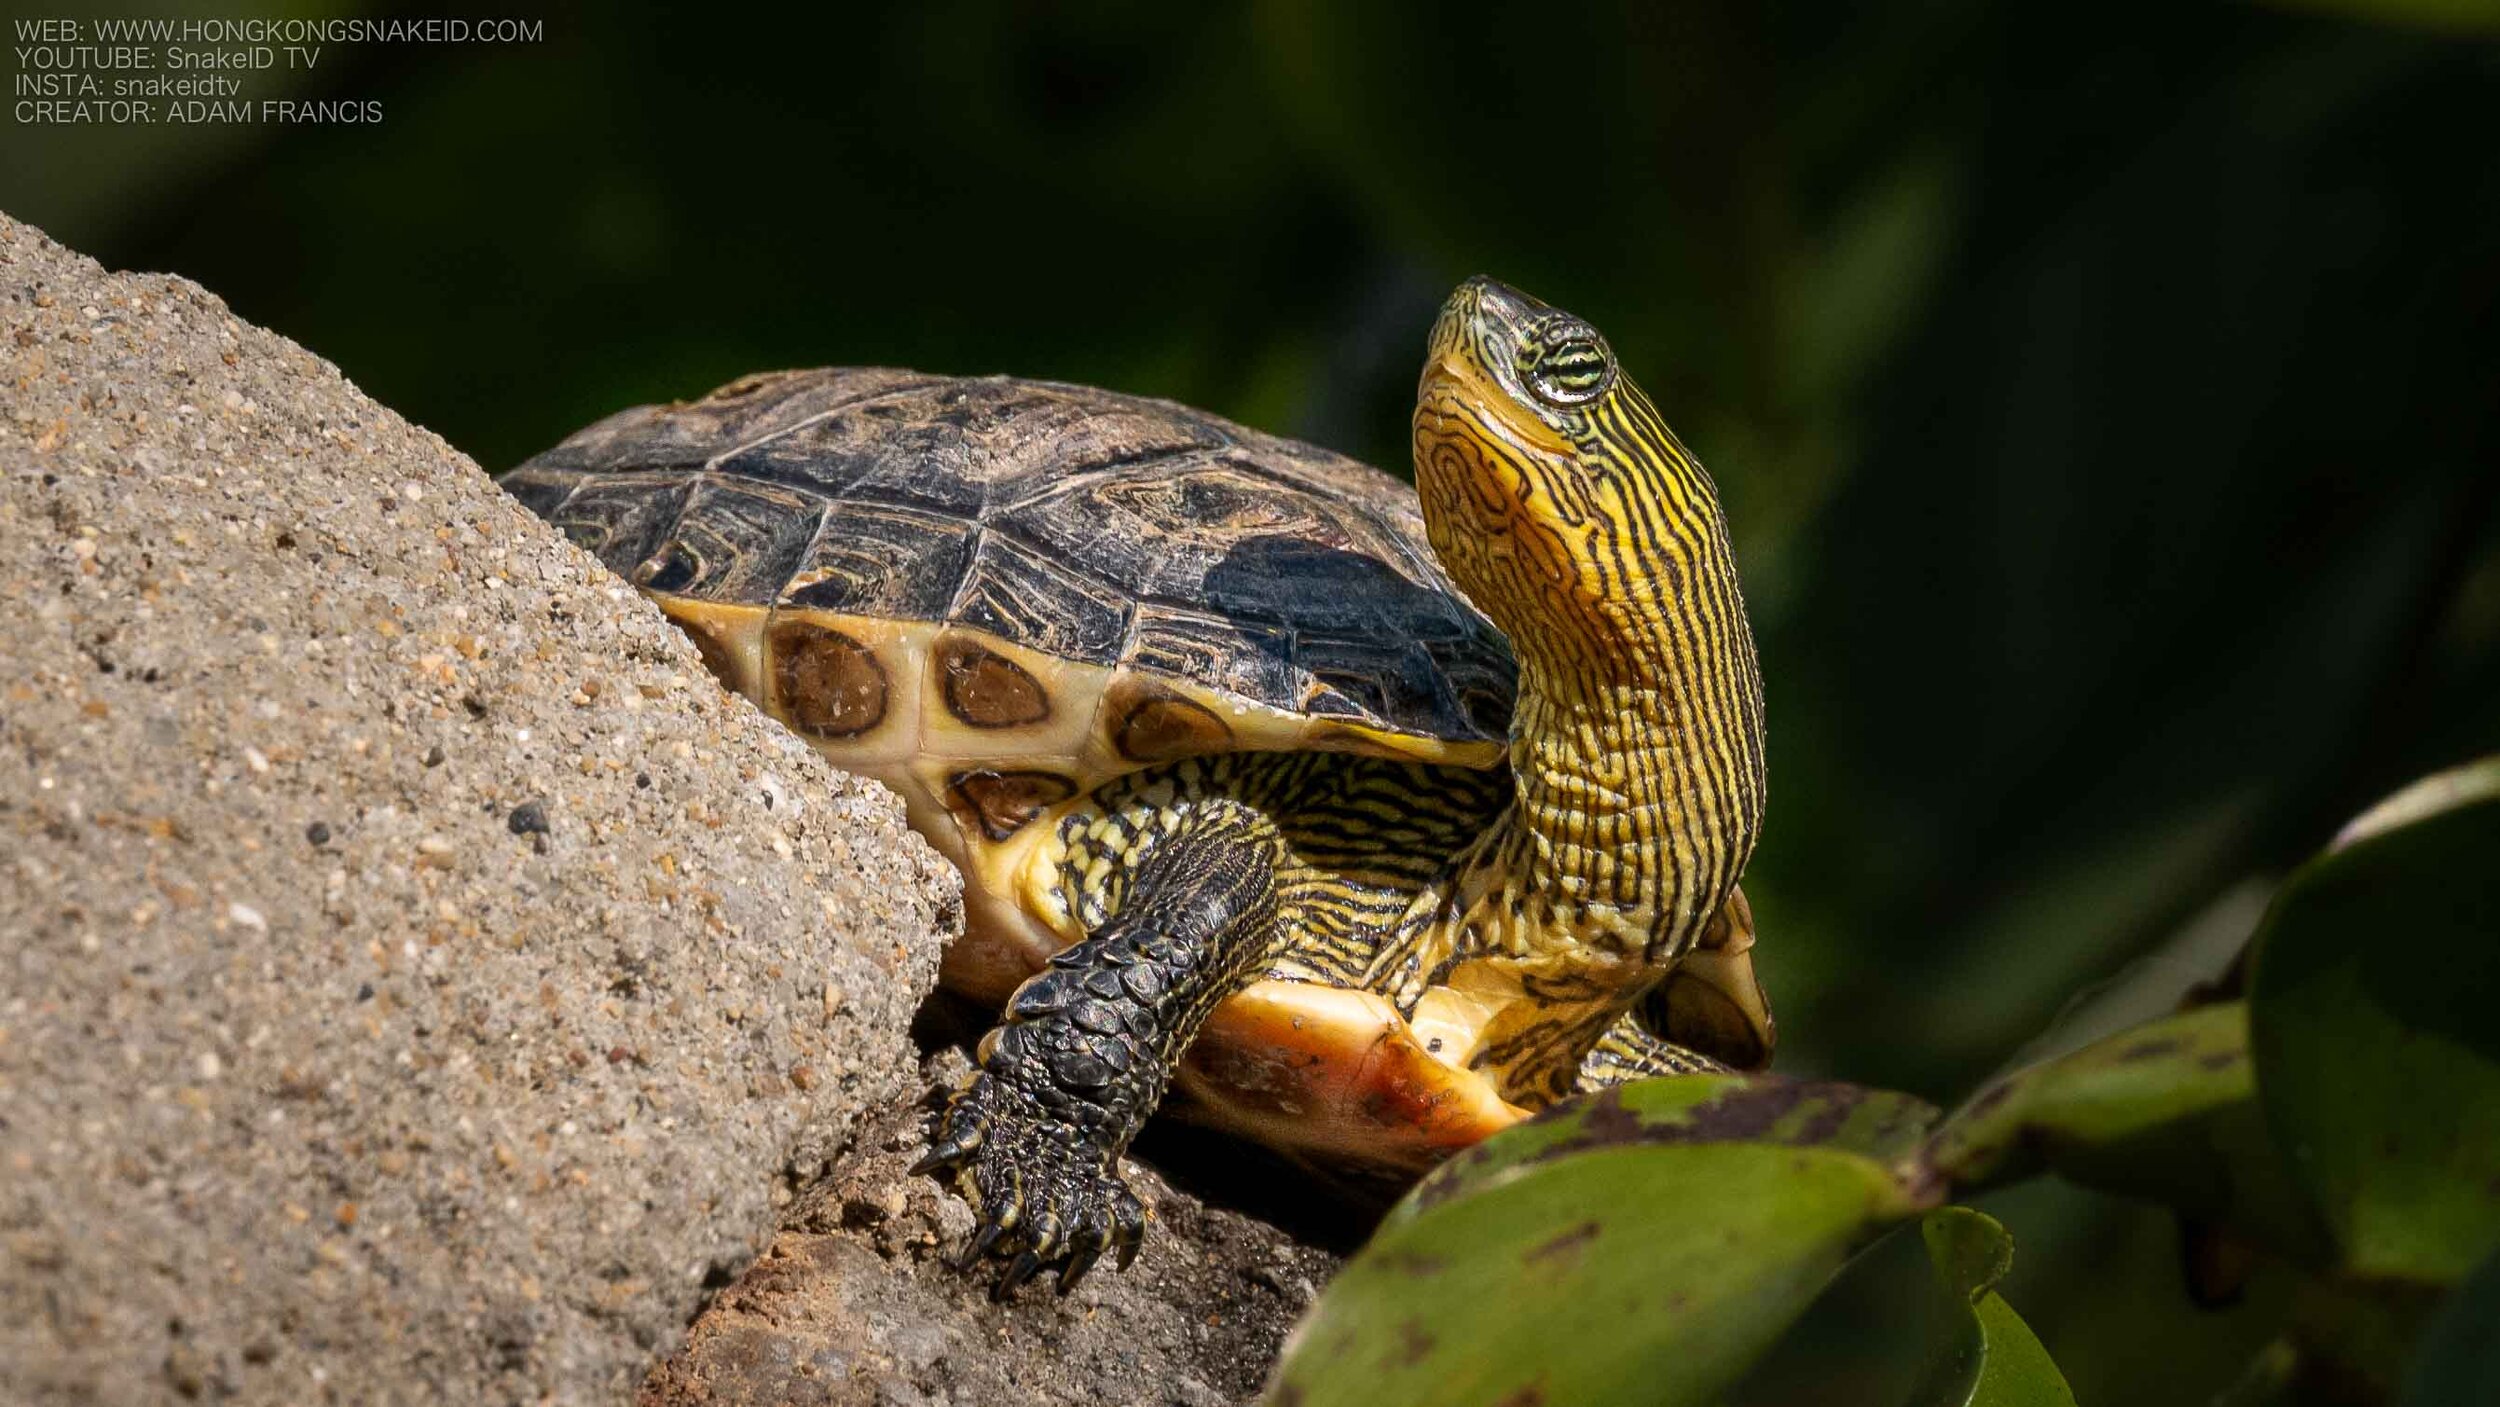 CHINESE STRIPED TERRAPIN